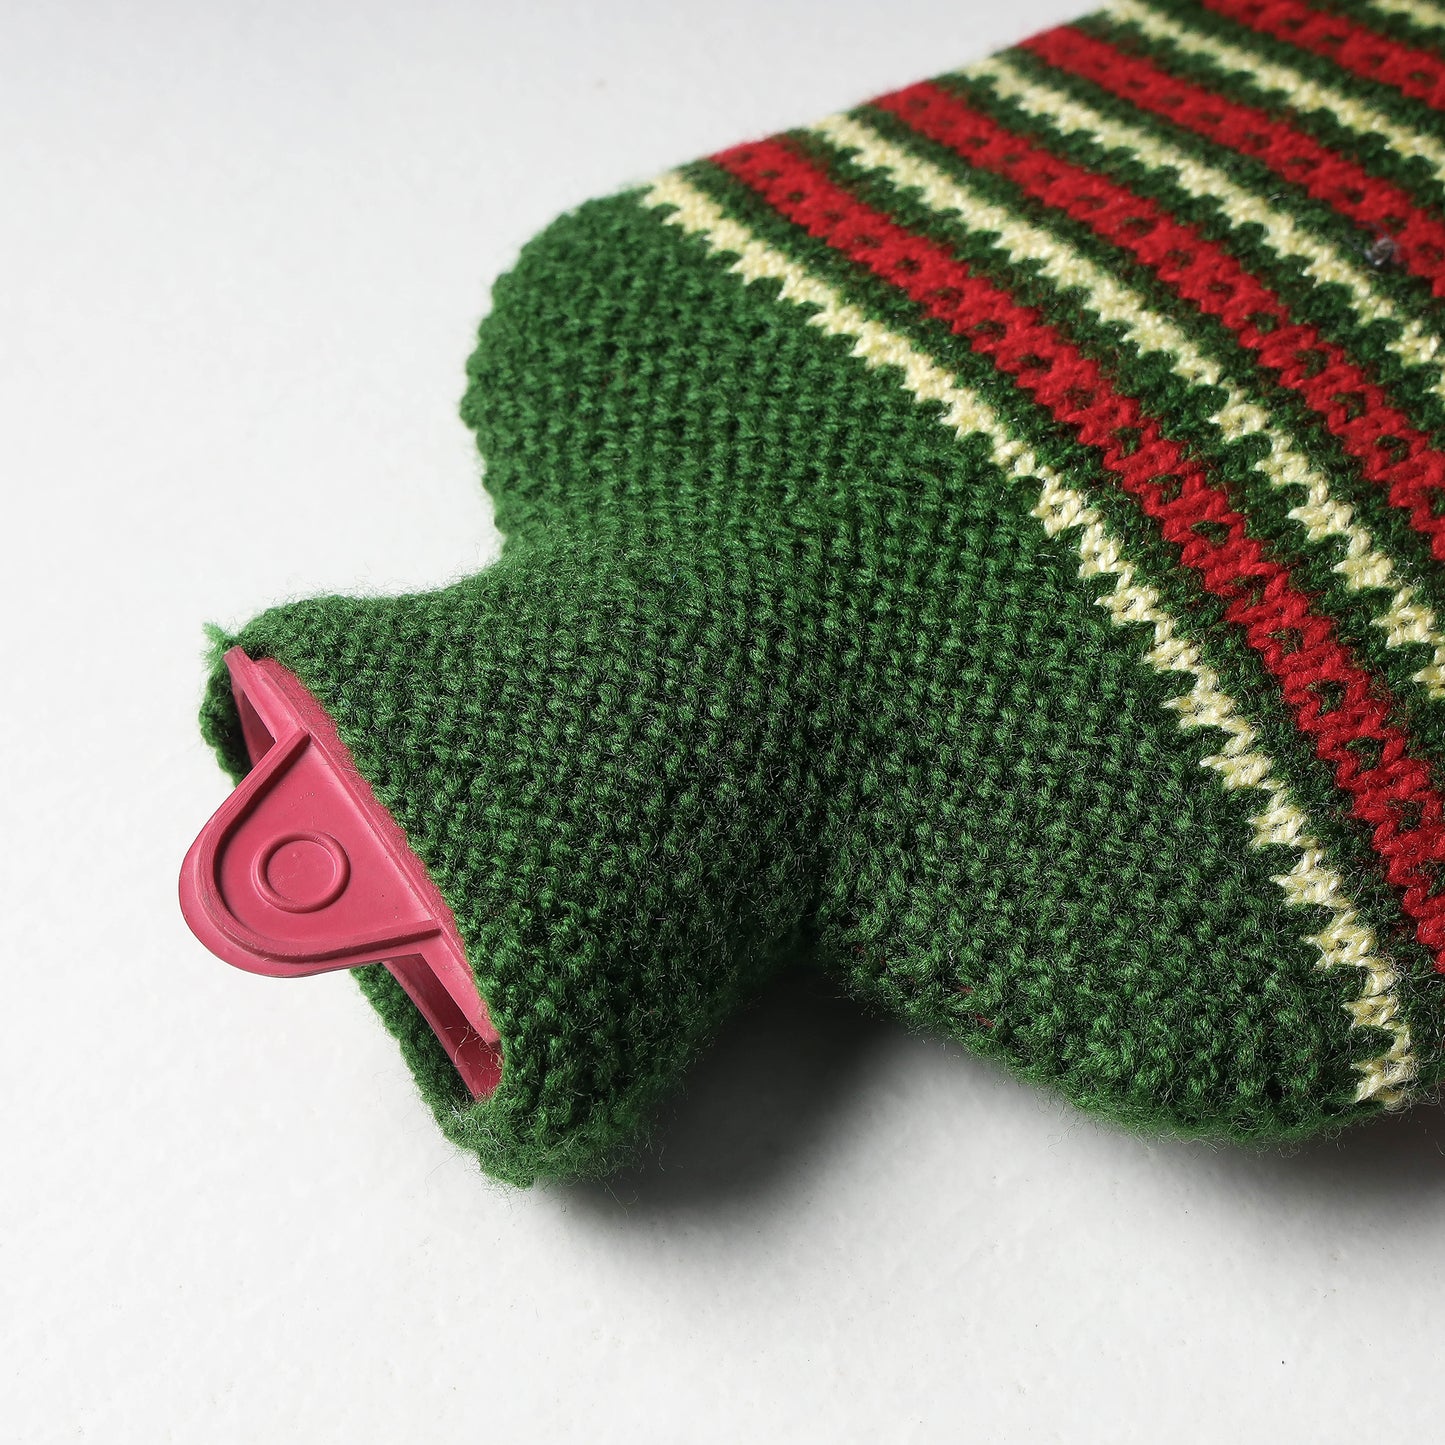 Hot Water Bottle Cover
